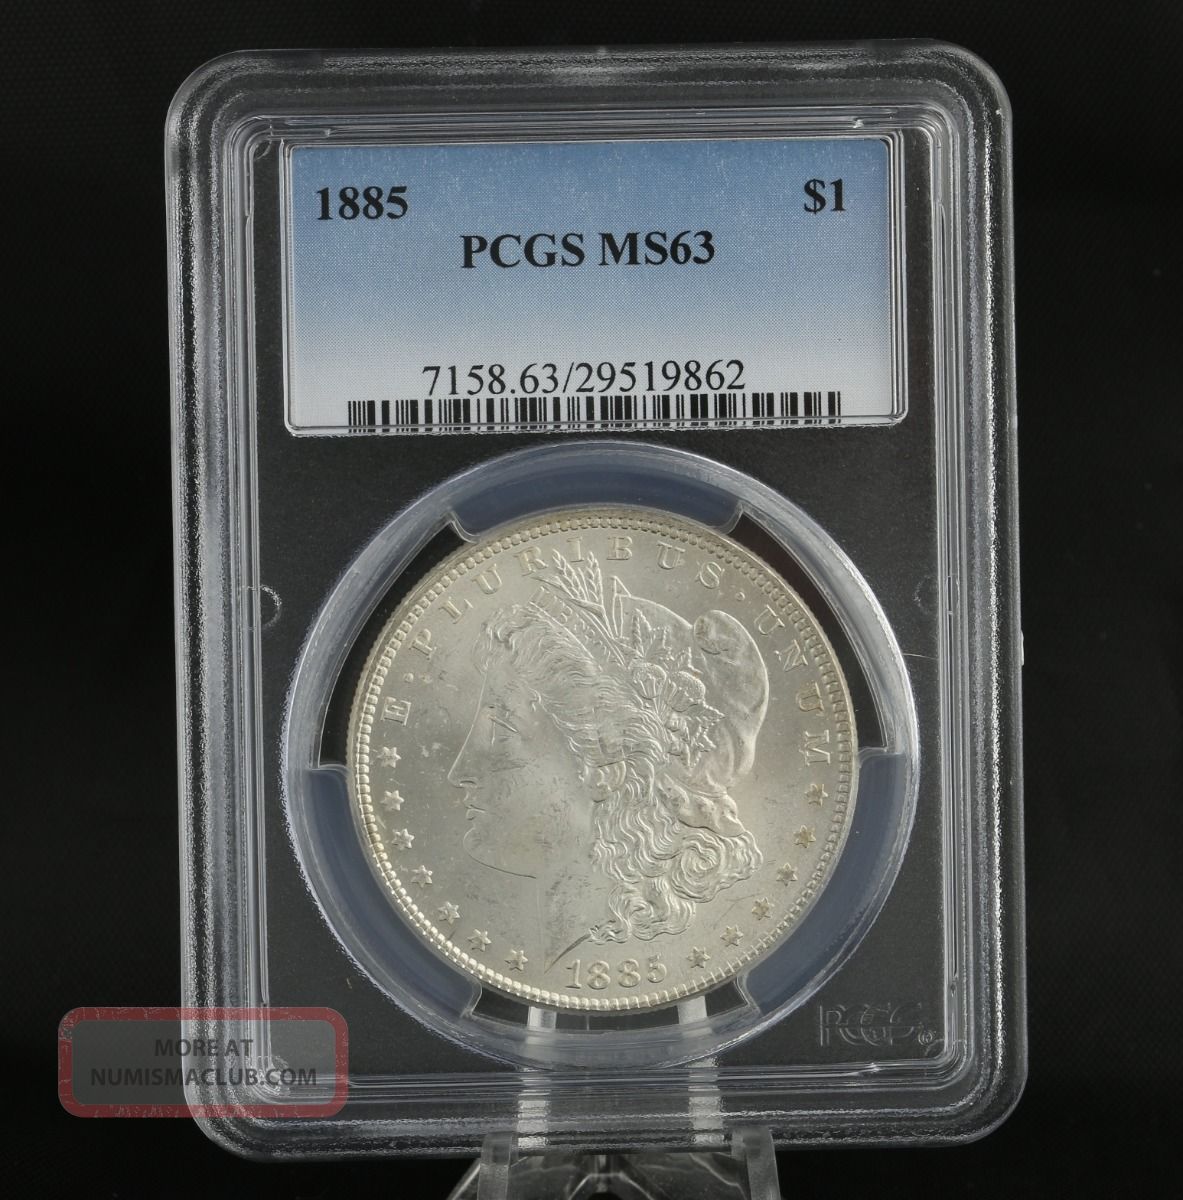 1885 Pcgs Ms63 Morgan Dollar - Graded Silver Investment Certified Coin $1